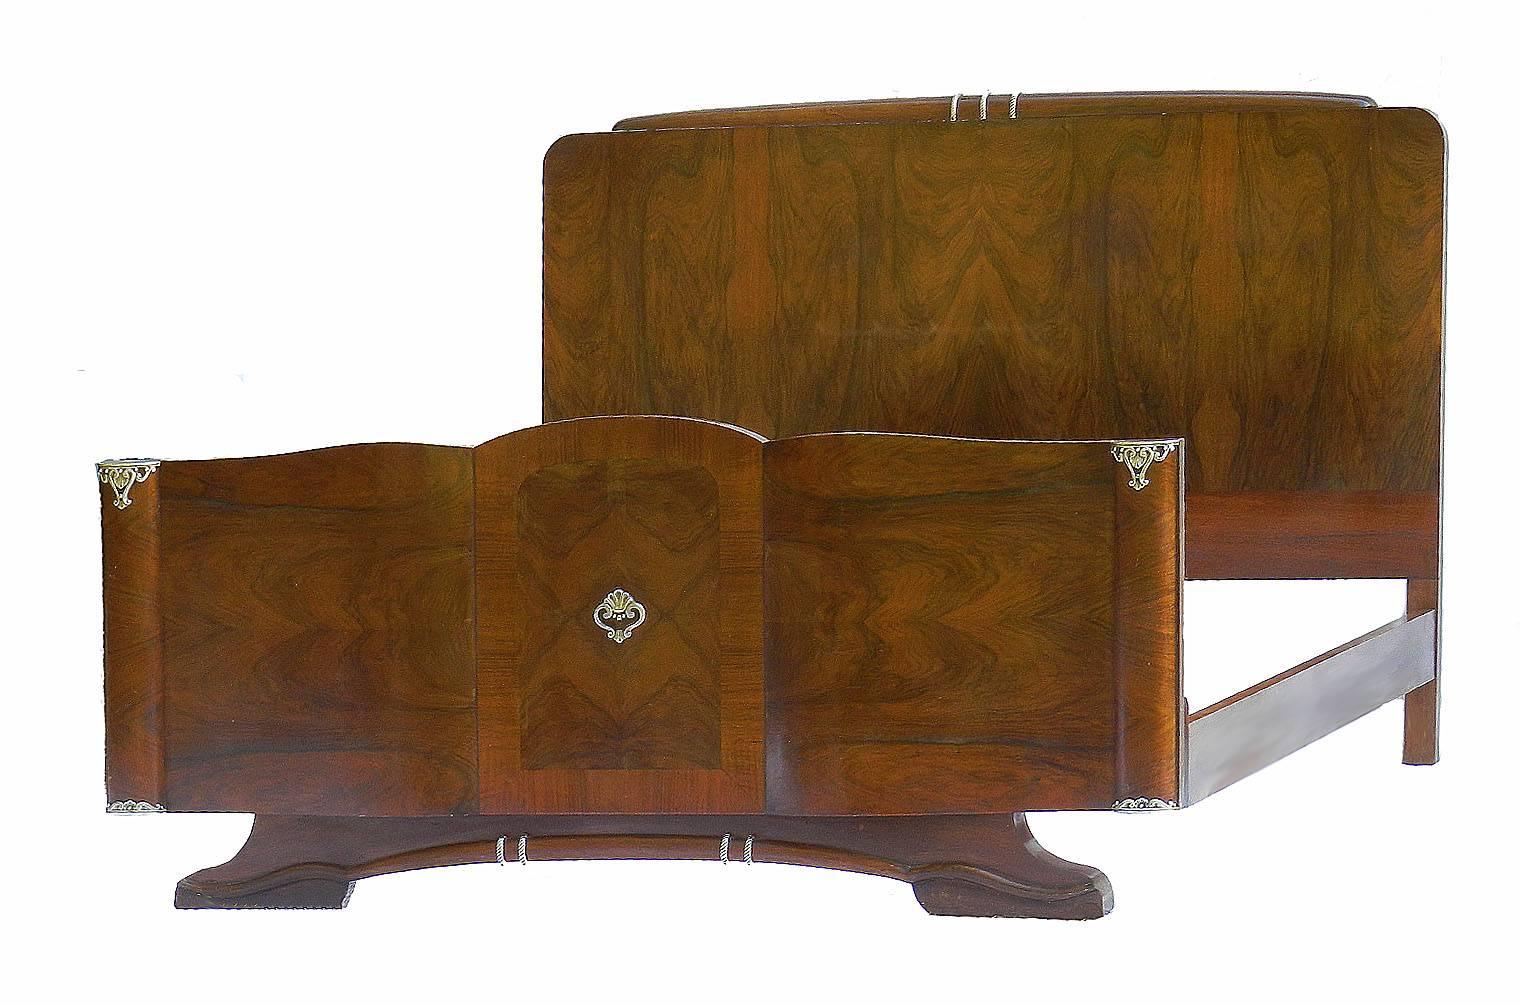 Mid-Century bed French walnut US Queen or UK king-size, circa 1930-1940
Art Deco Hollywood
High polish, figured walnut, apologies for reflections
Silver metal decorative mounts
Great shape unusual break front foot board
Foot height 72cms 28ins
This